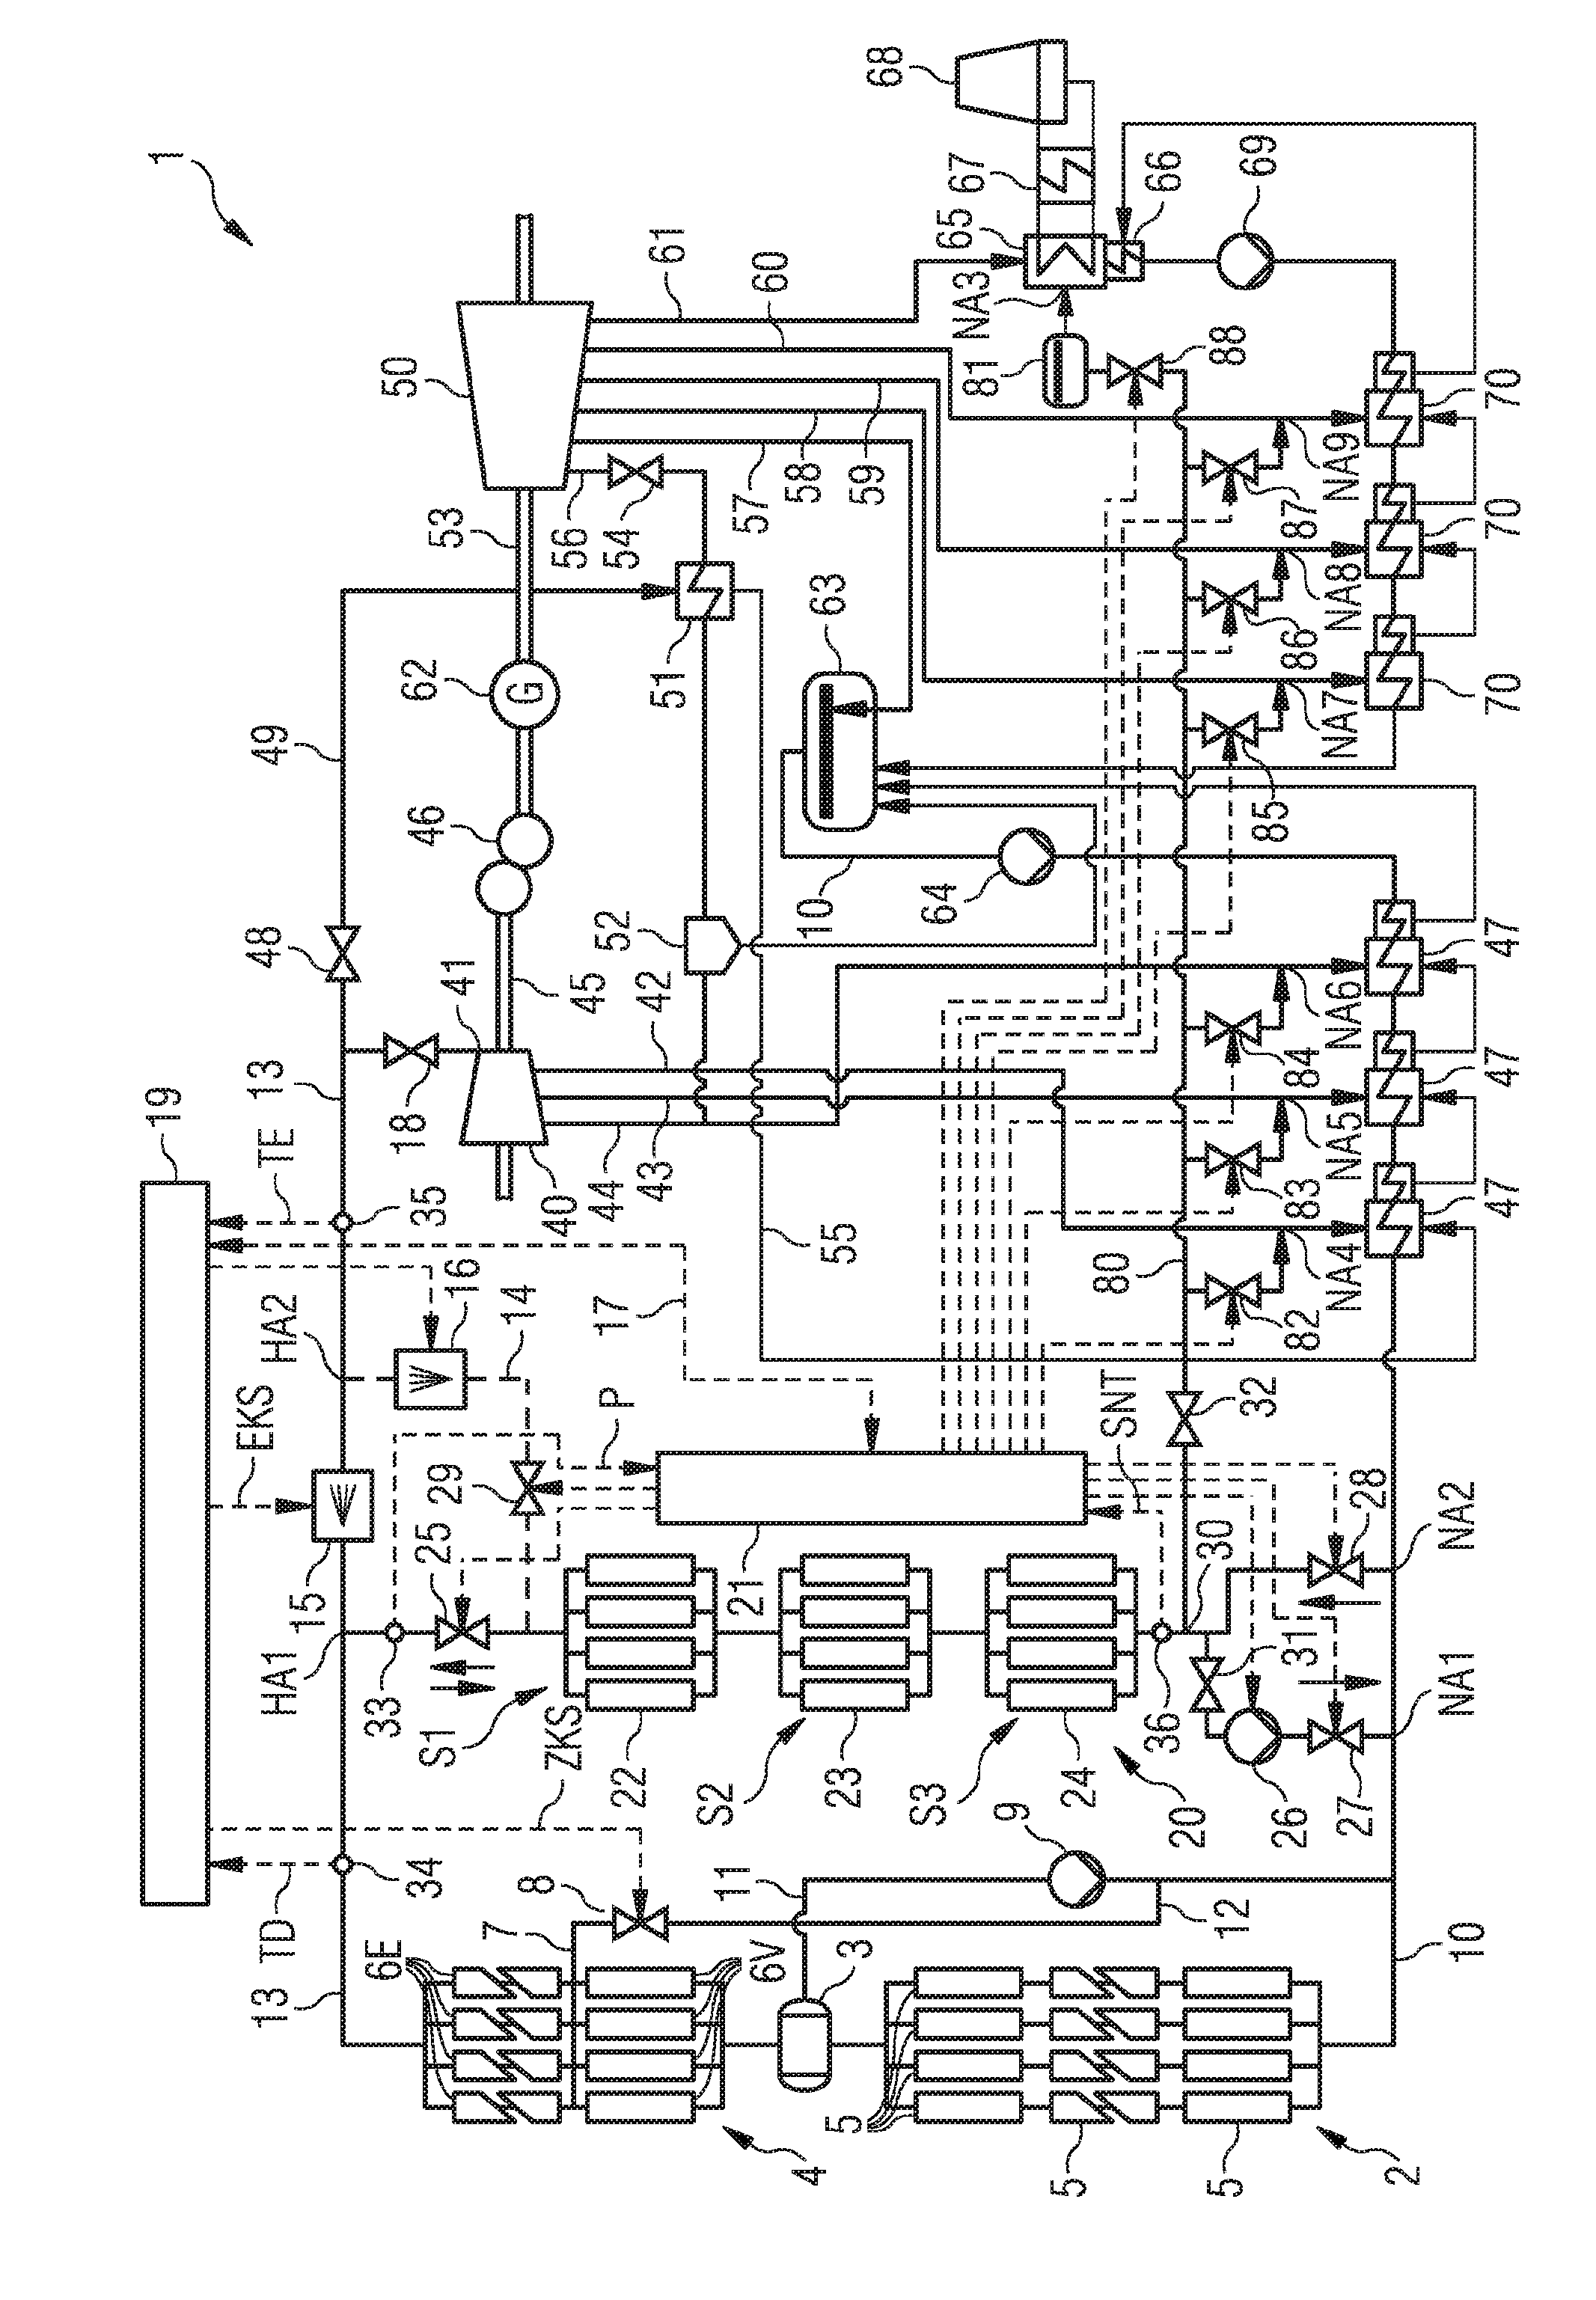 Solar thermal power plant and method for operating a solar thermal power plant